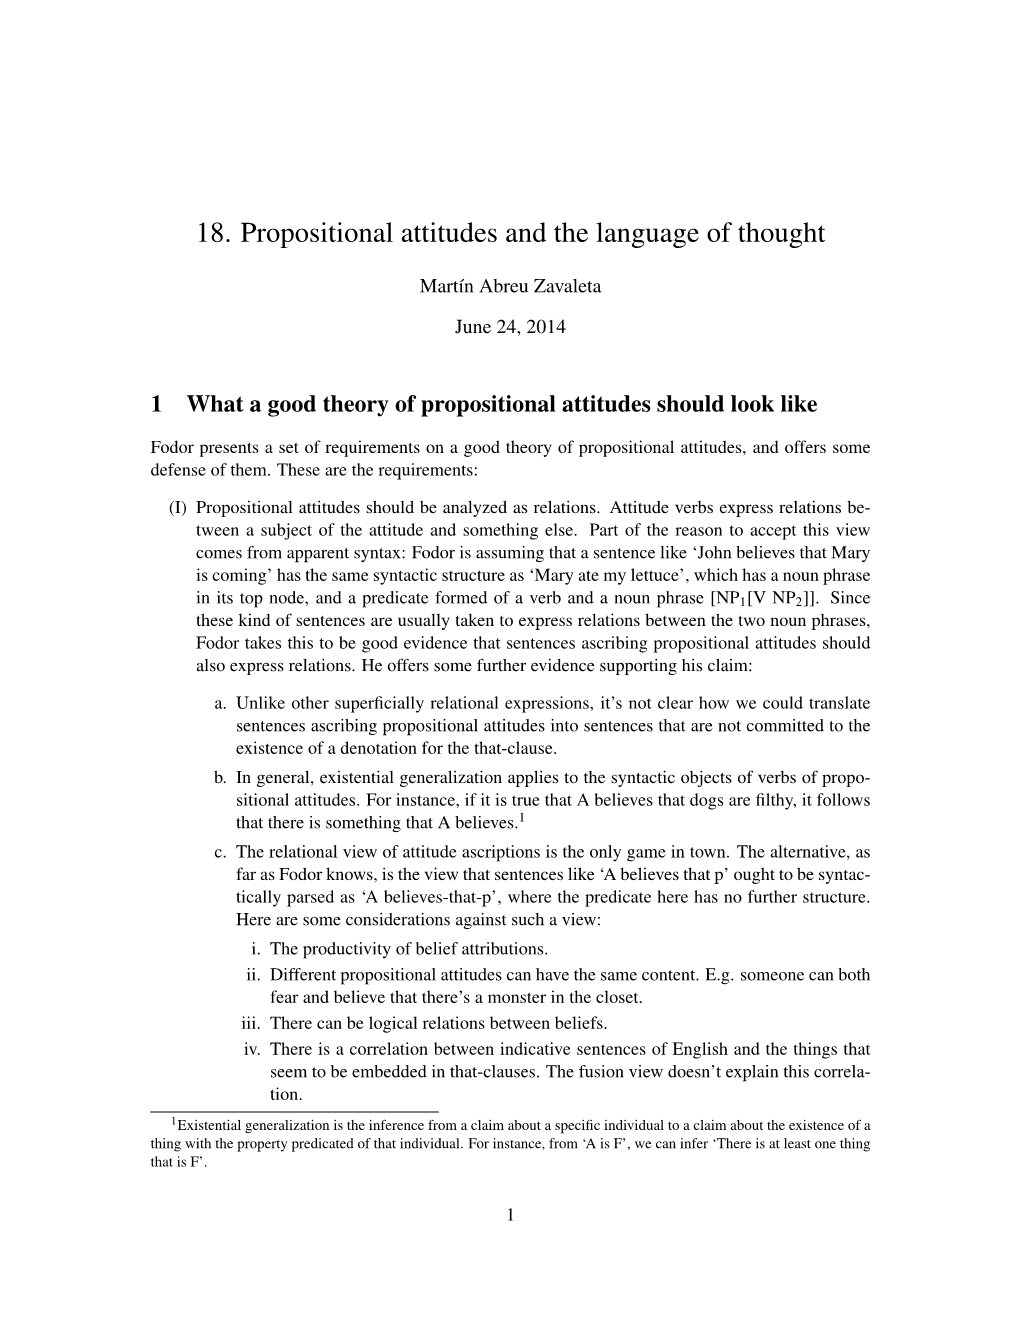 18. Propositional Attitudes and the Language of Thought